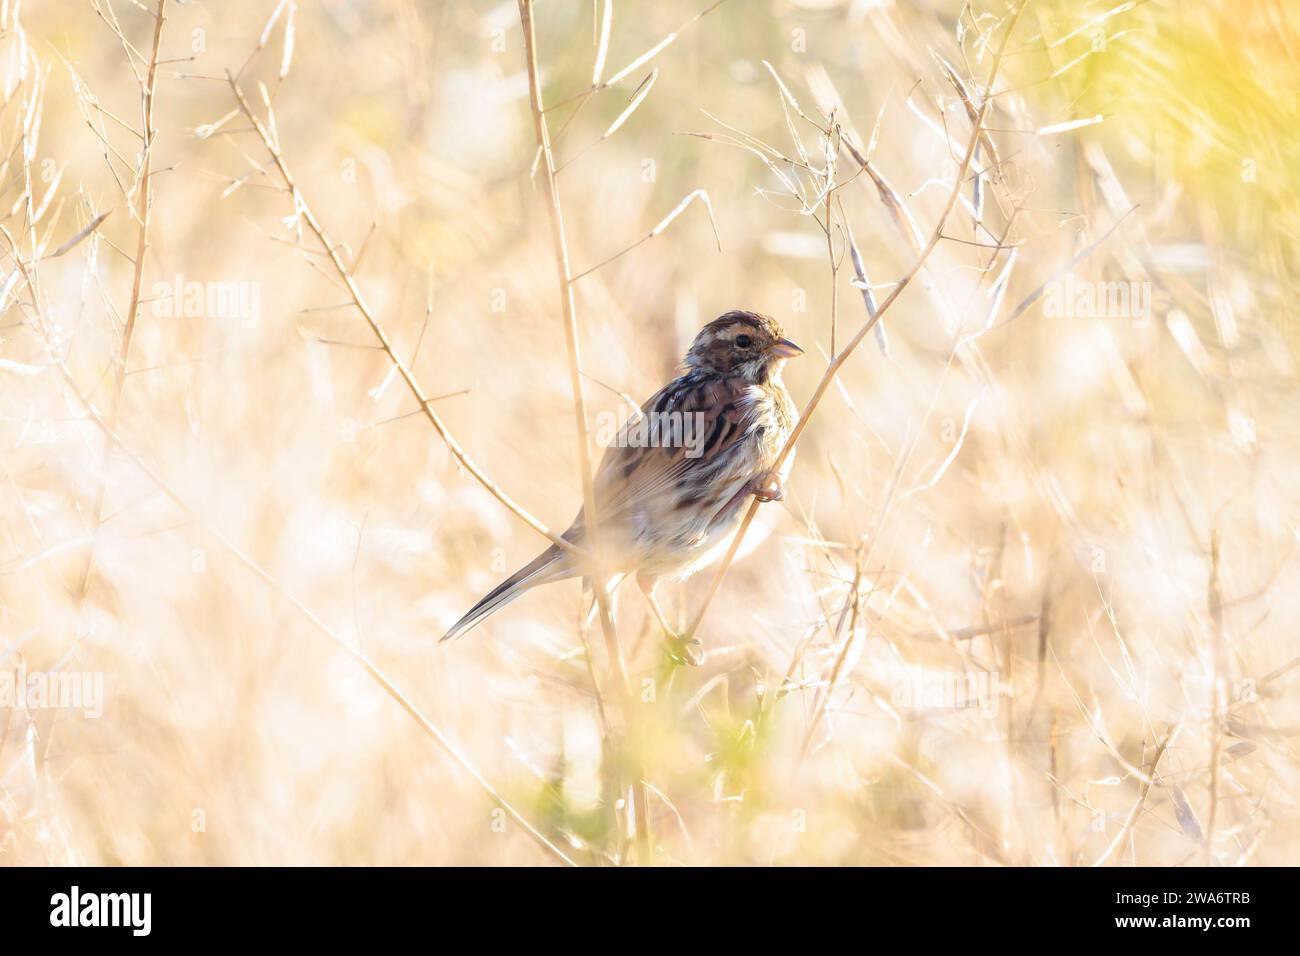 A common reed bunting Emberiza schoeniclus, sings a song on a reed plume Phragmites australis. The reed beds waving due to strong winds in Spring seas Stock Photo